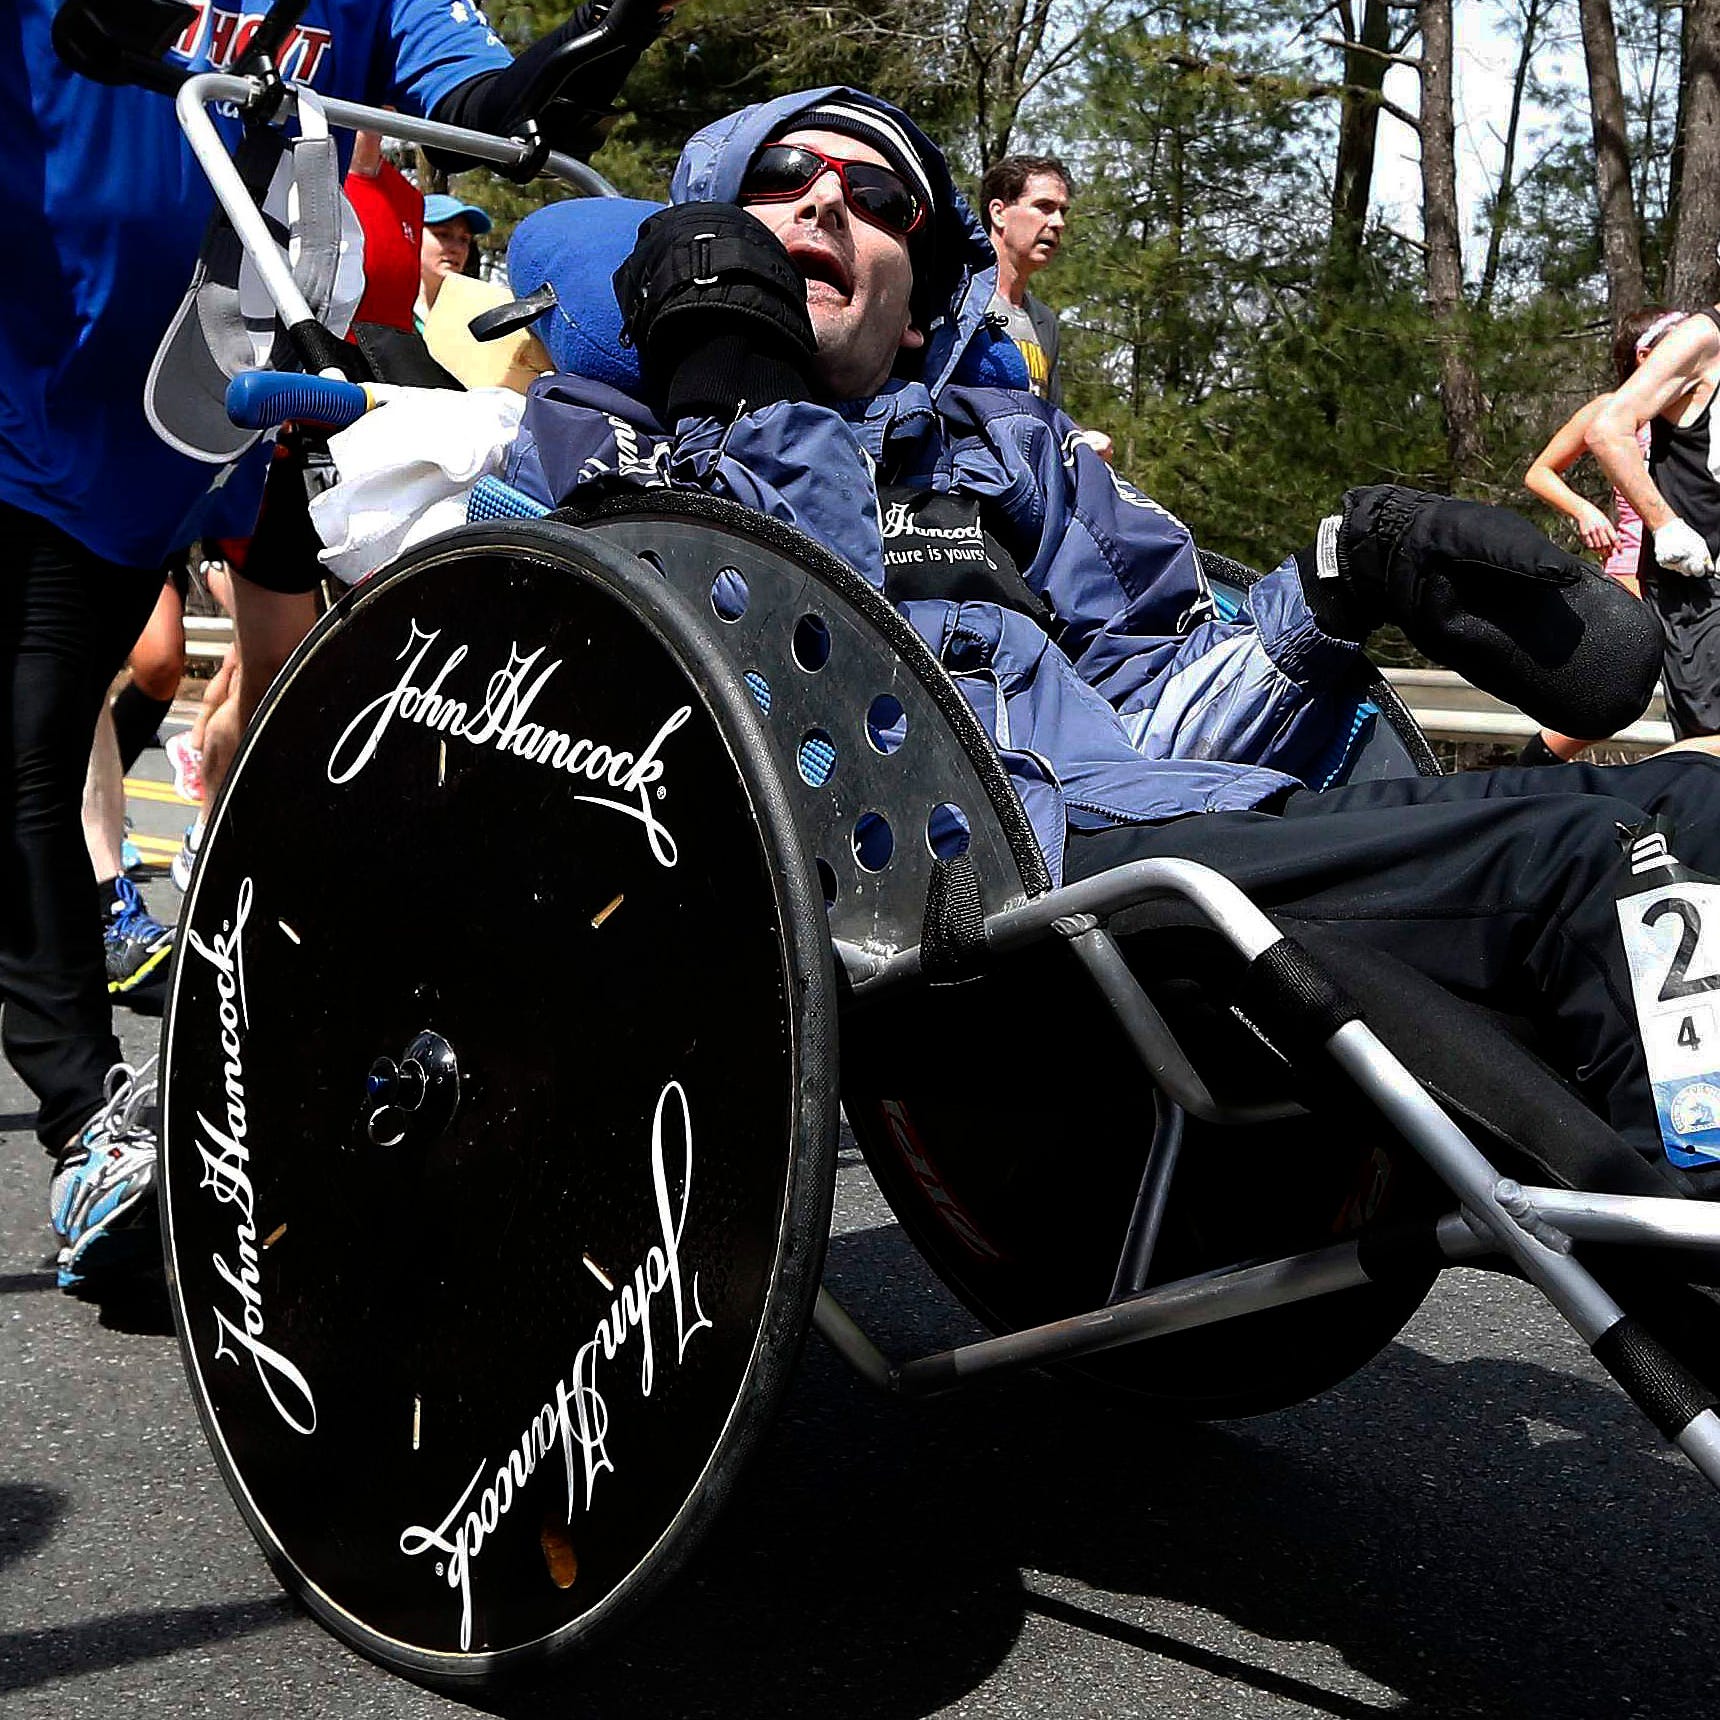 Rick Hoyt, center, is pushed by his father Dick at the 2013 Boston Marathon. The Hoyt became a fixture at the Boston Marathon and other races for decades.